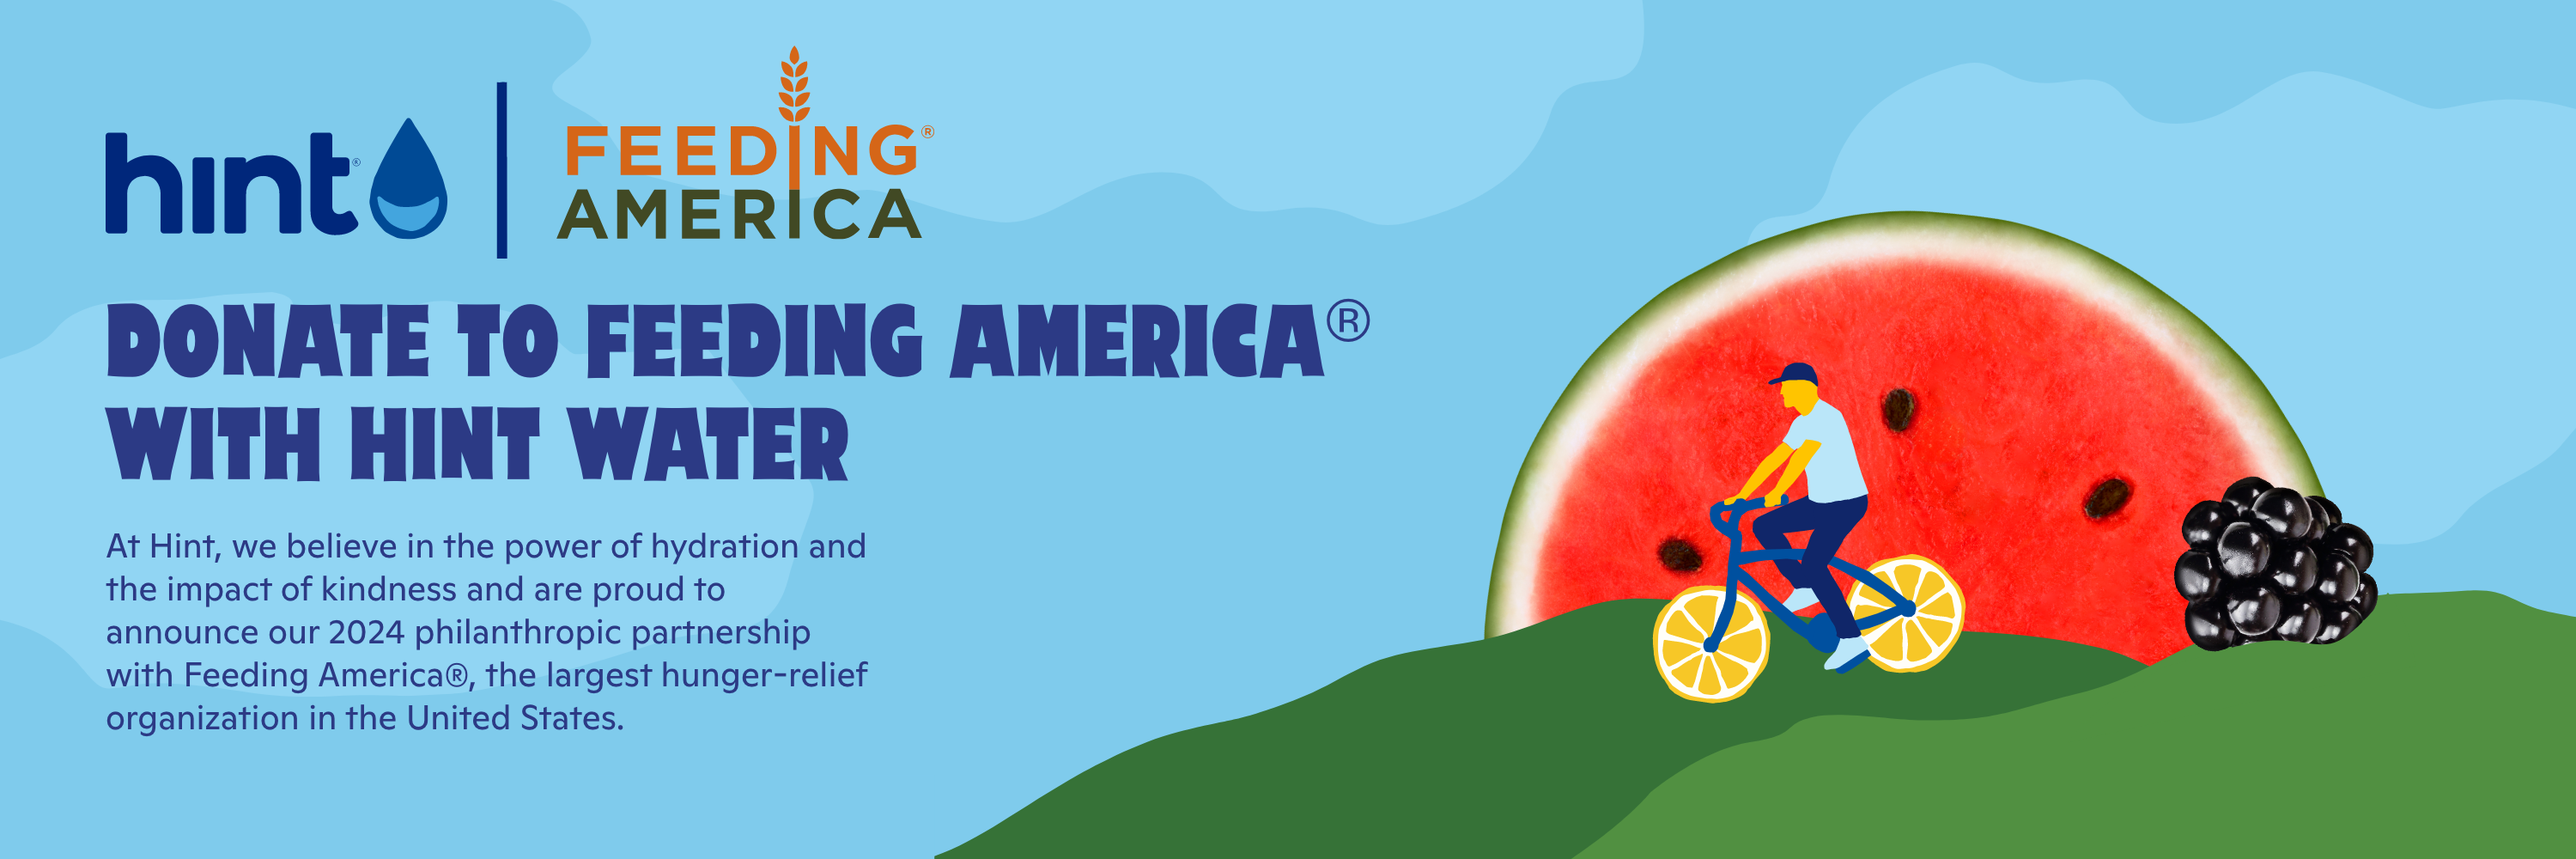 Donate to Feeding America with hint water.